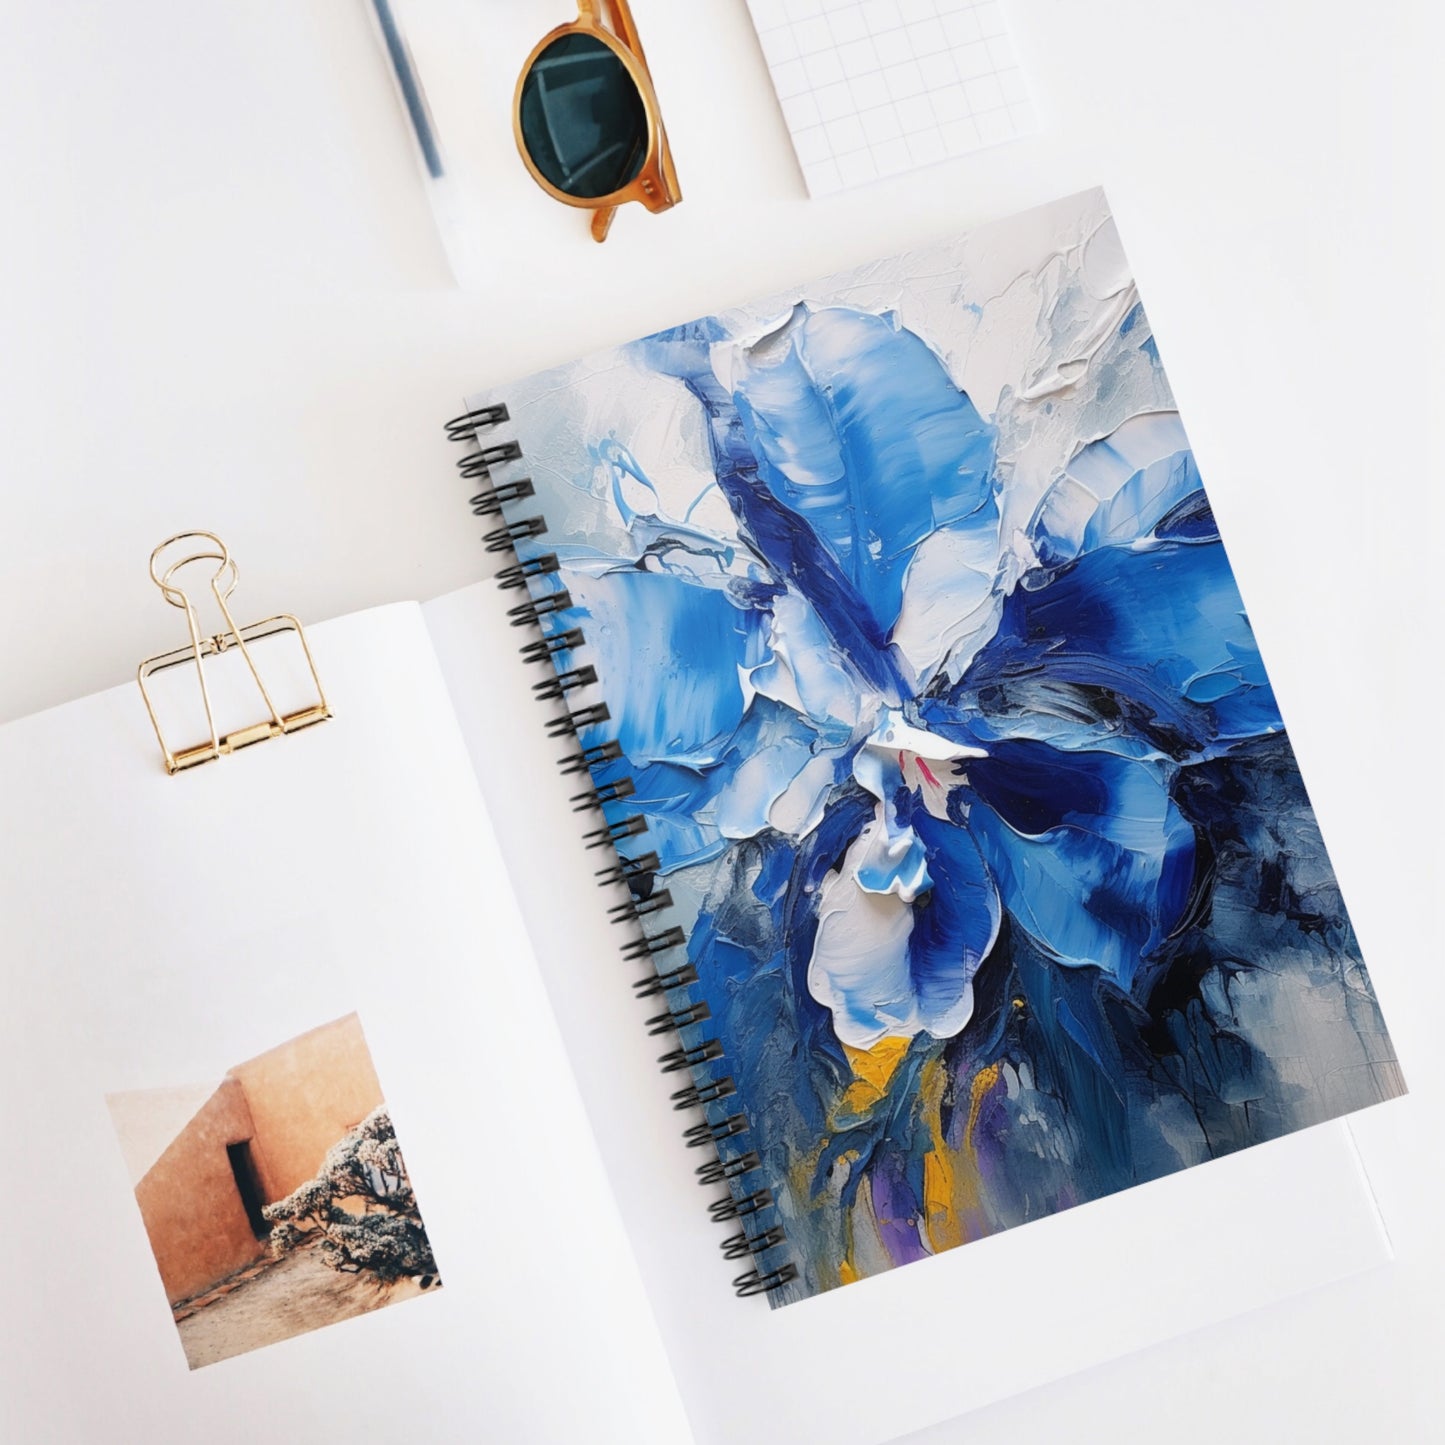 Spiral Notebook Ruled with Blue Orchid Drawing: A Delicate Tribute to Nature's Splendor